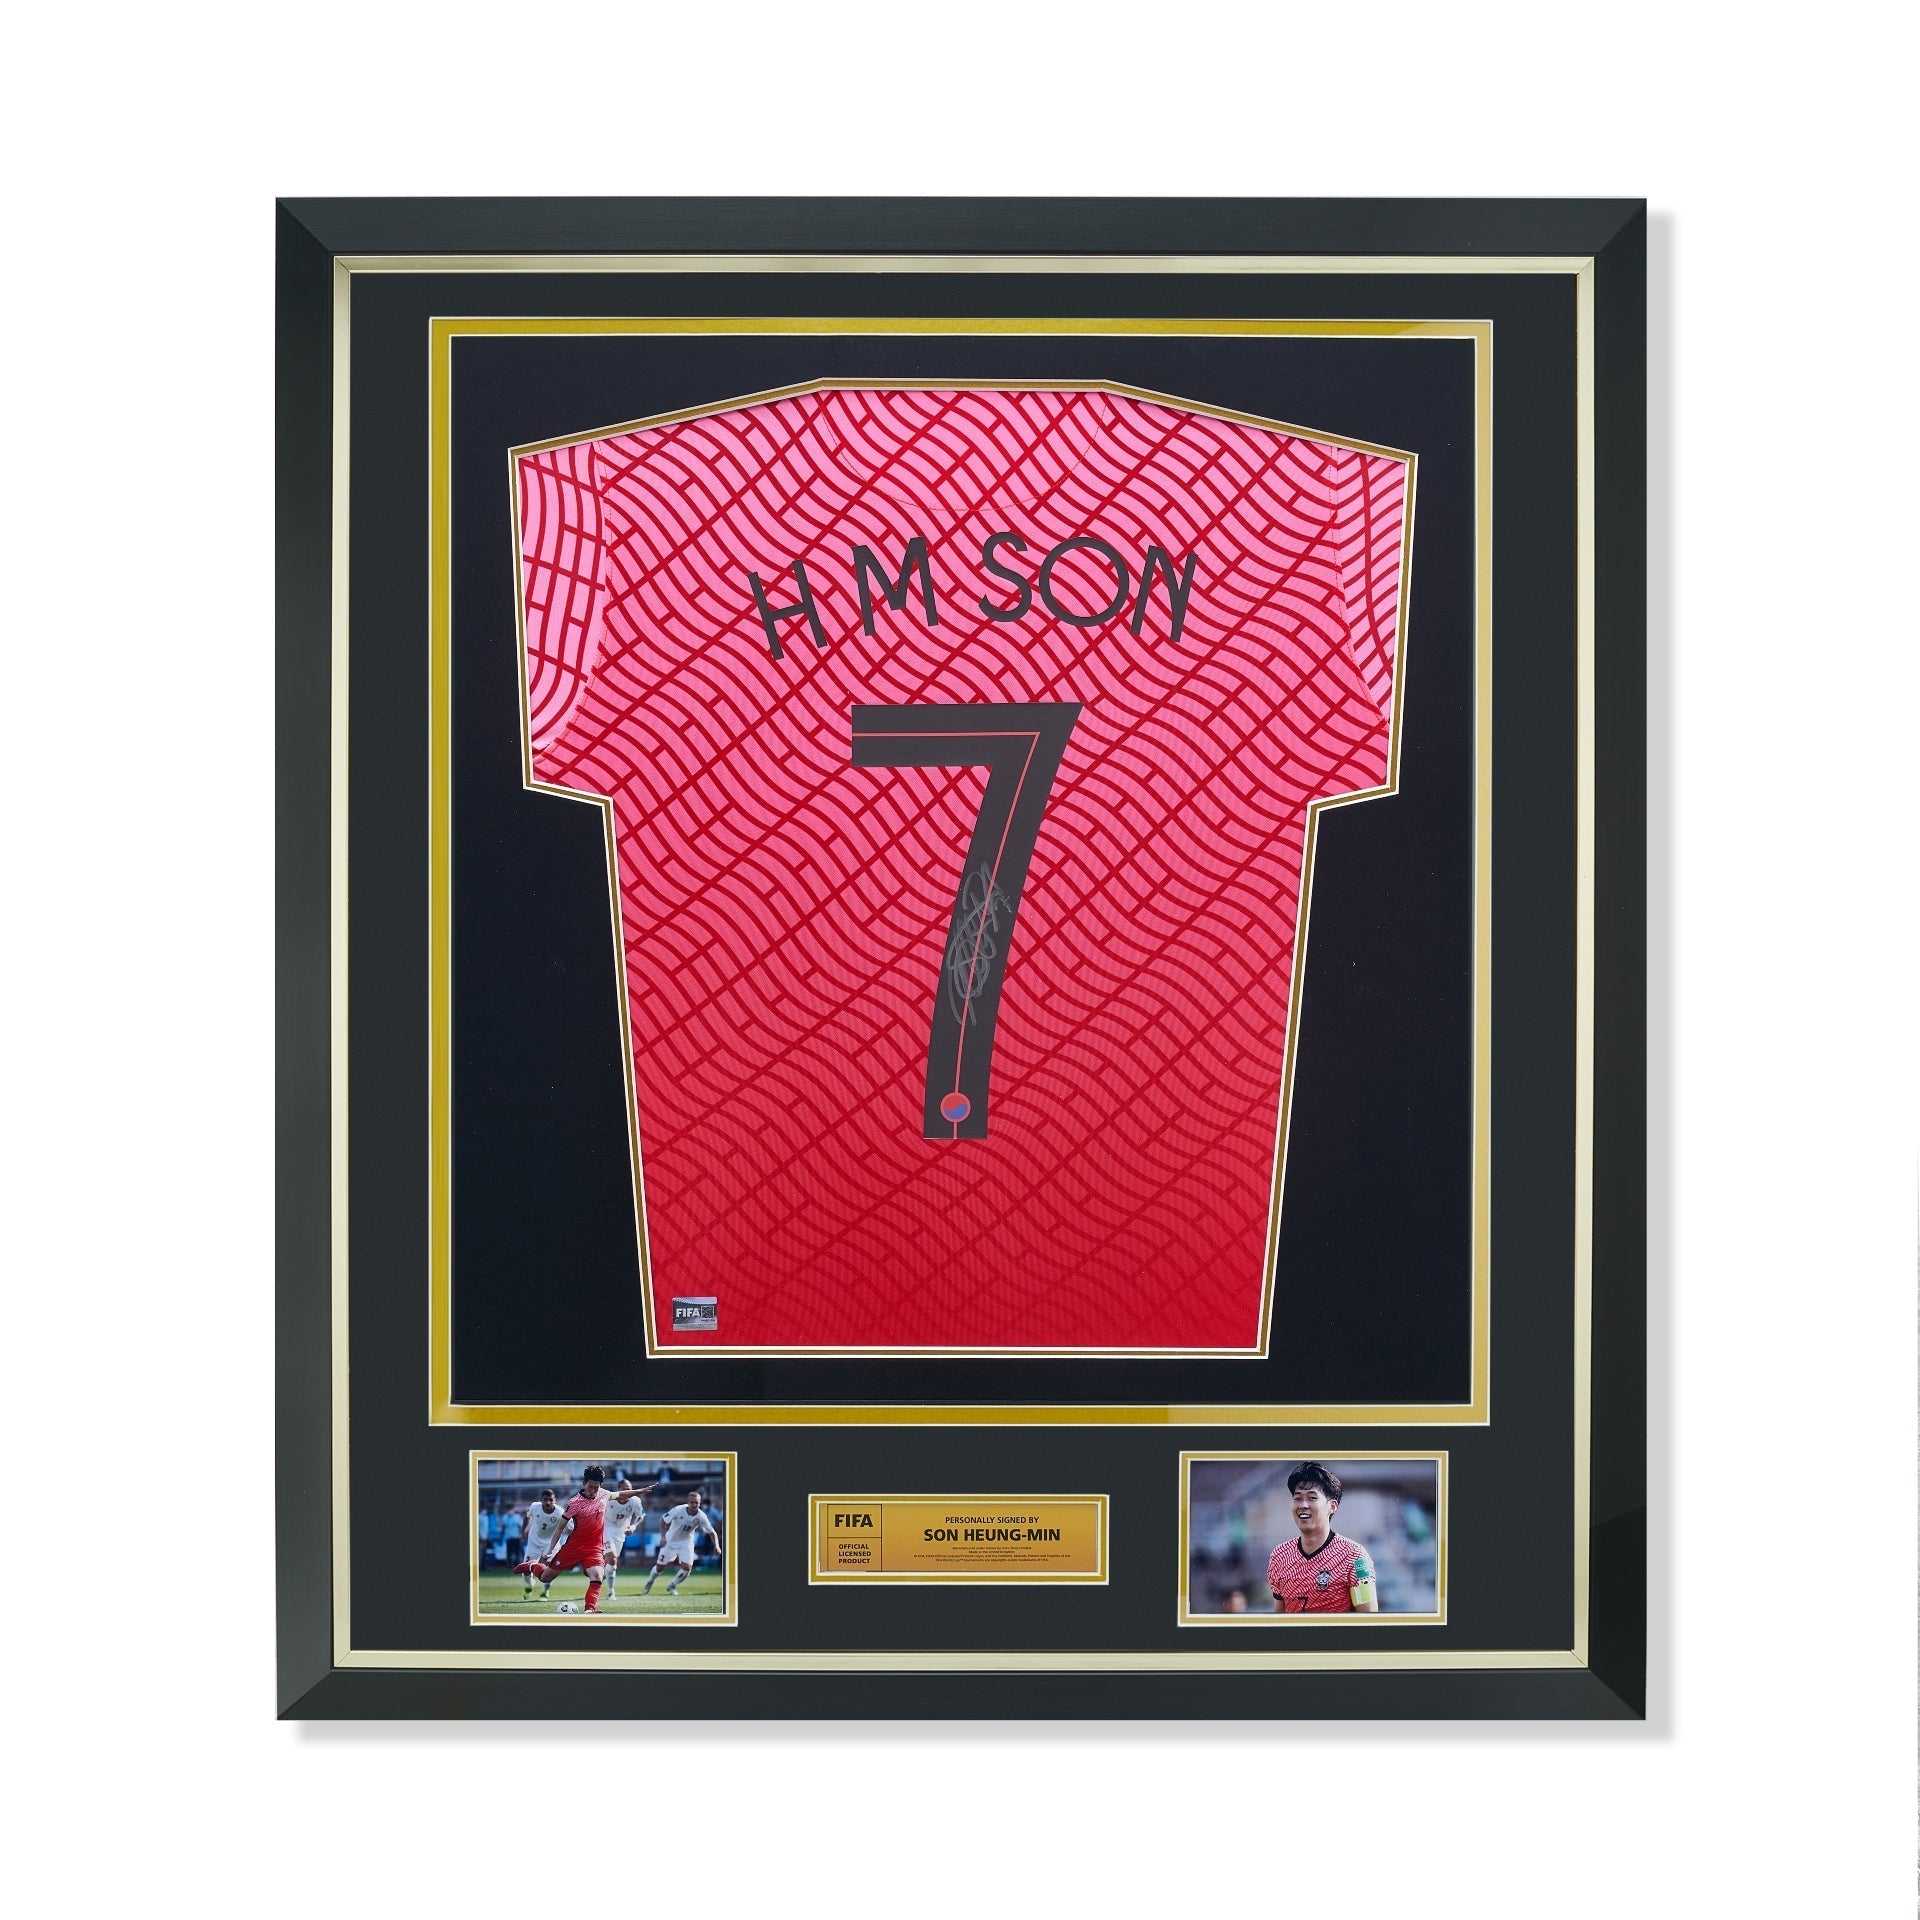 FIFA World Cup Son Heung-Min Official Signed And Framed South Korea 2020 Home Shirt